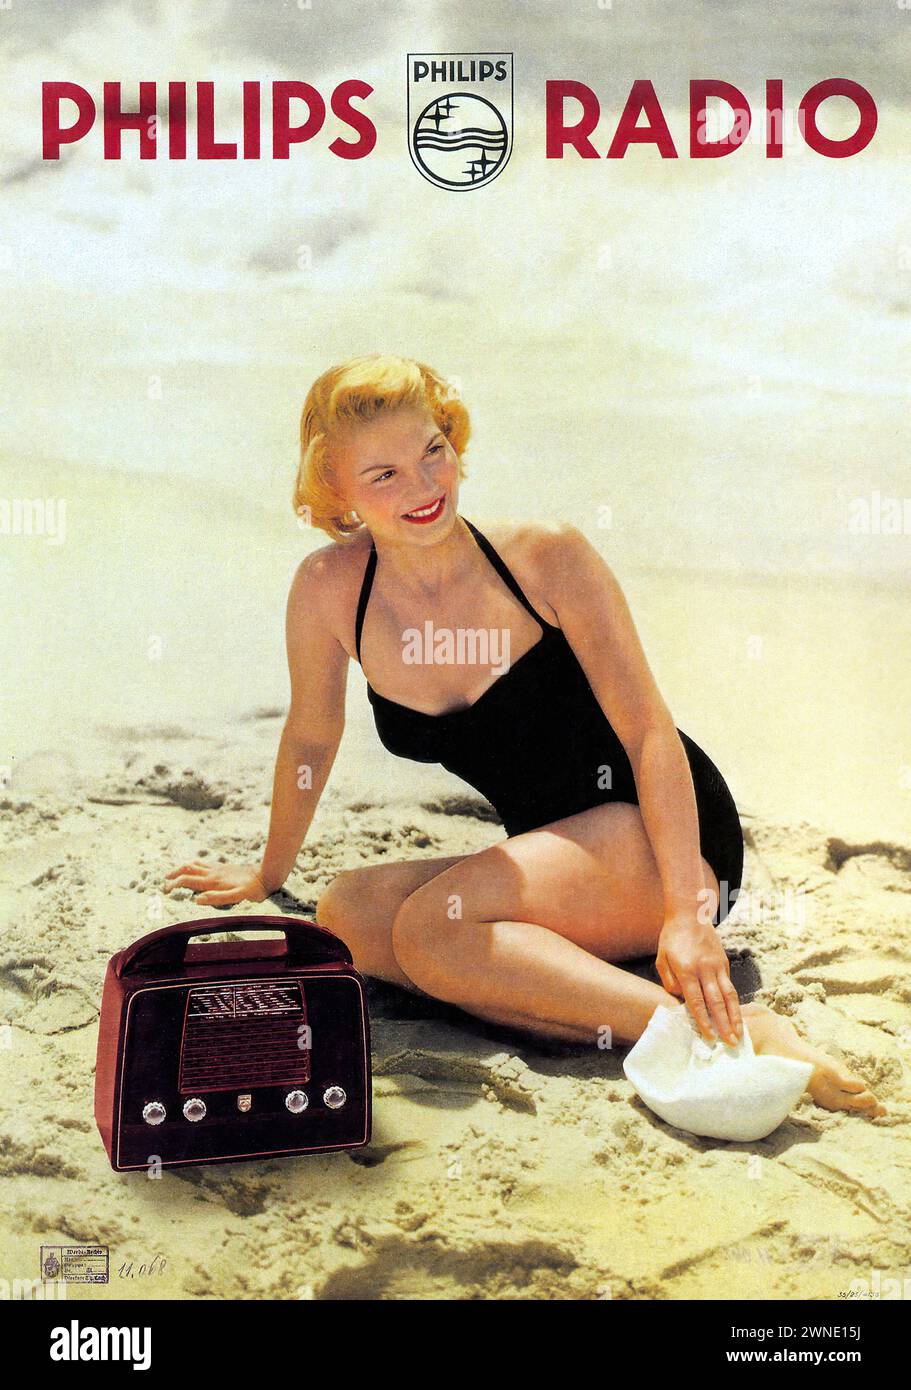 Vintage Advertising showing a cheerful woman in a swimsuit sitting on a beach with a Philips radio by her side. The scene exudes a sense of relaxation and leisure, emphasizing the portability and lifestyle associated with the product. The image is a photograph, which gives it a sense of immediacy and realism, typical of mid-20th-century advertising. Stock Photo